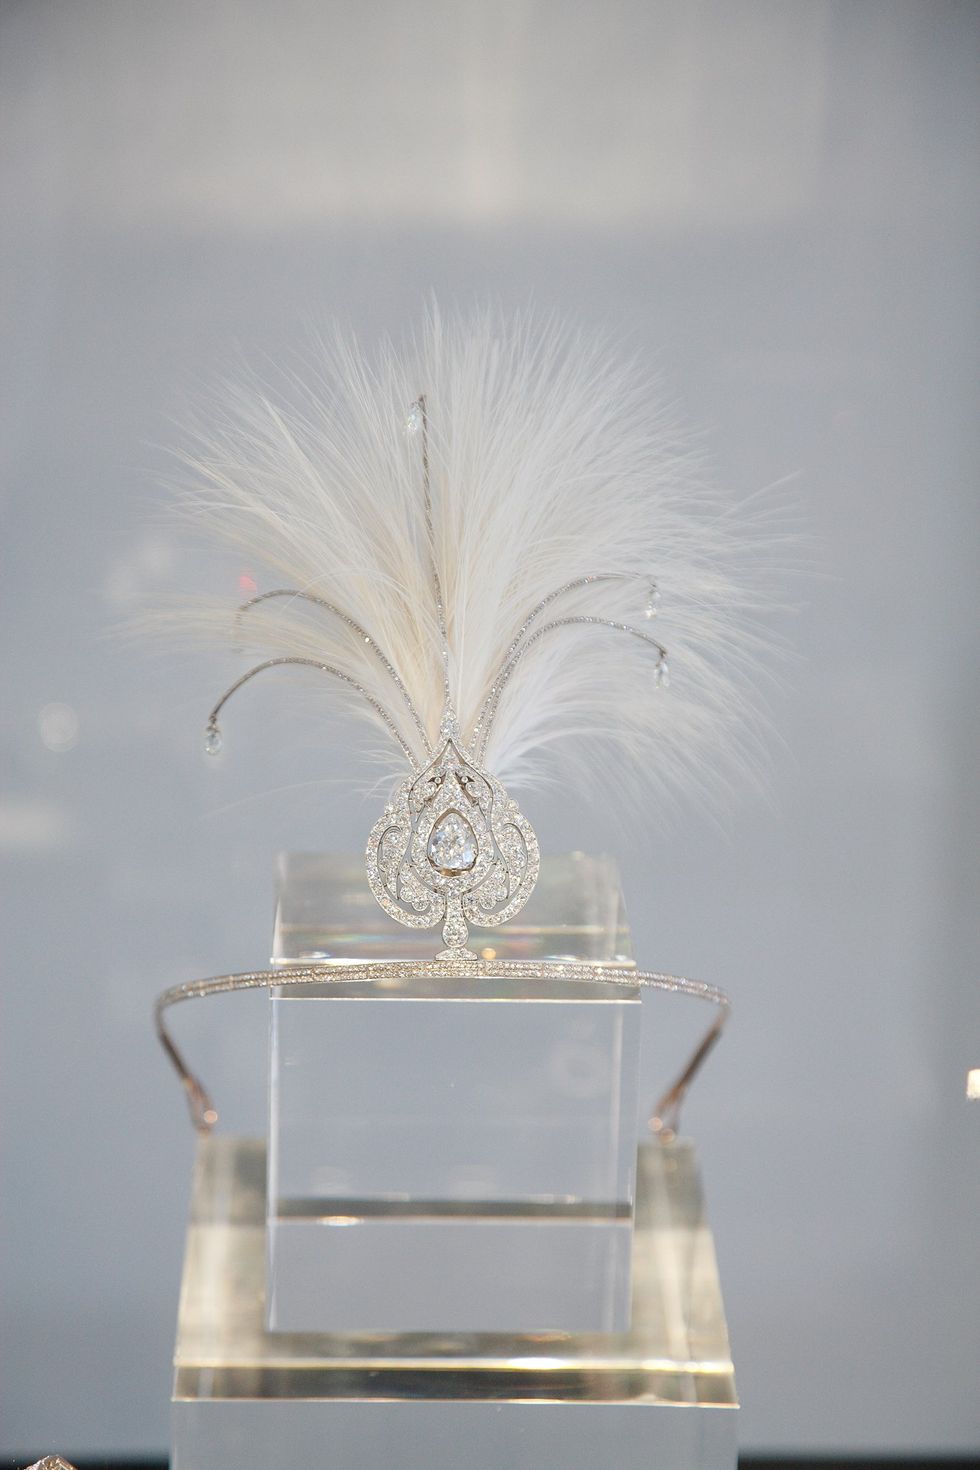 Natural material, Still life photography, Silver, Feather, Trophy, Perfume, Crystal, Gemstone, Transparent material, 